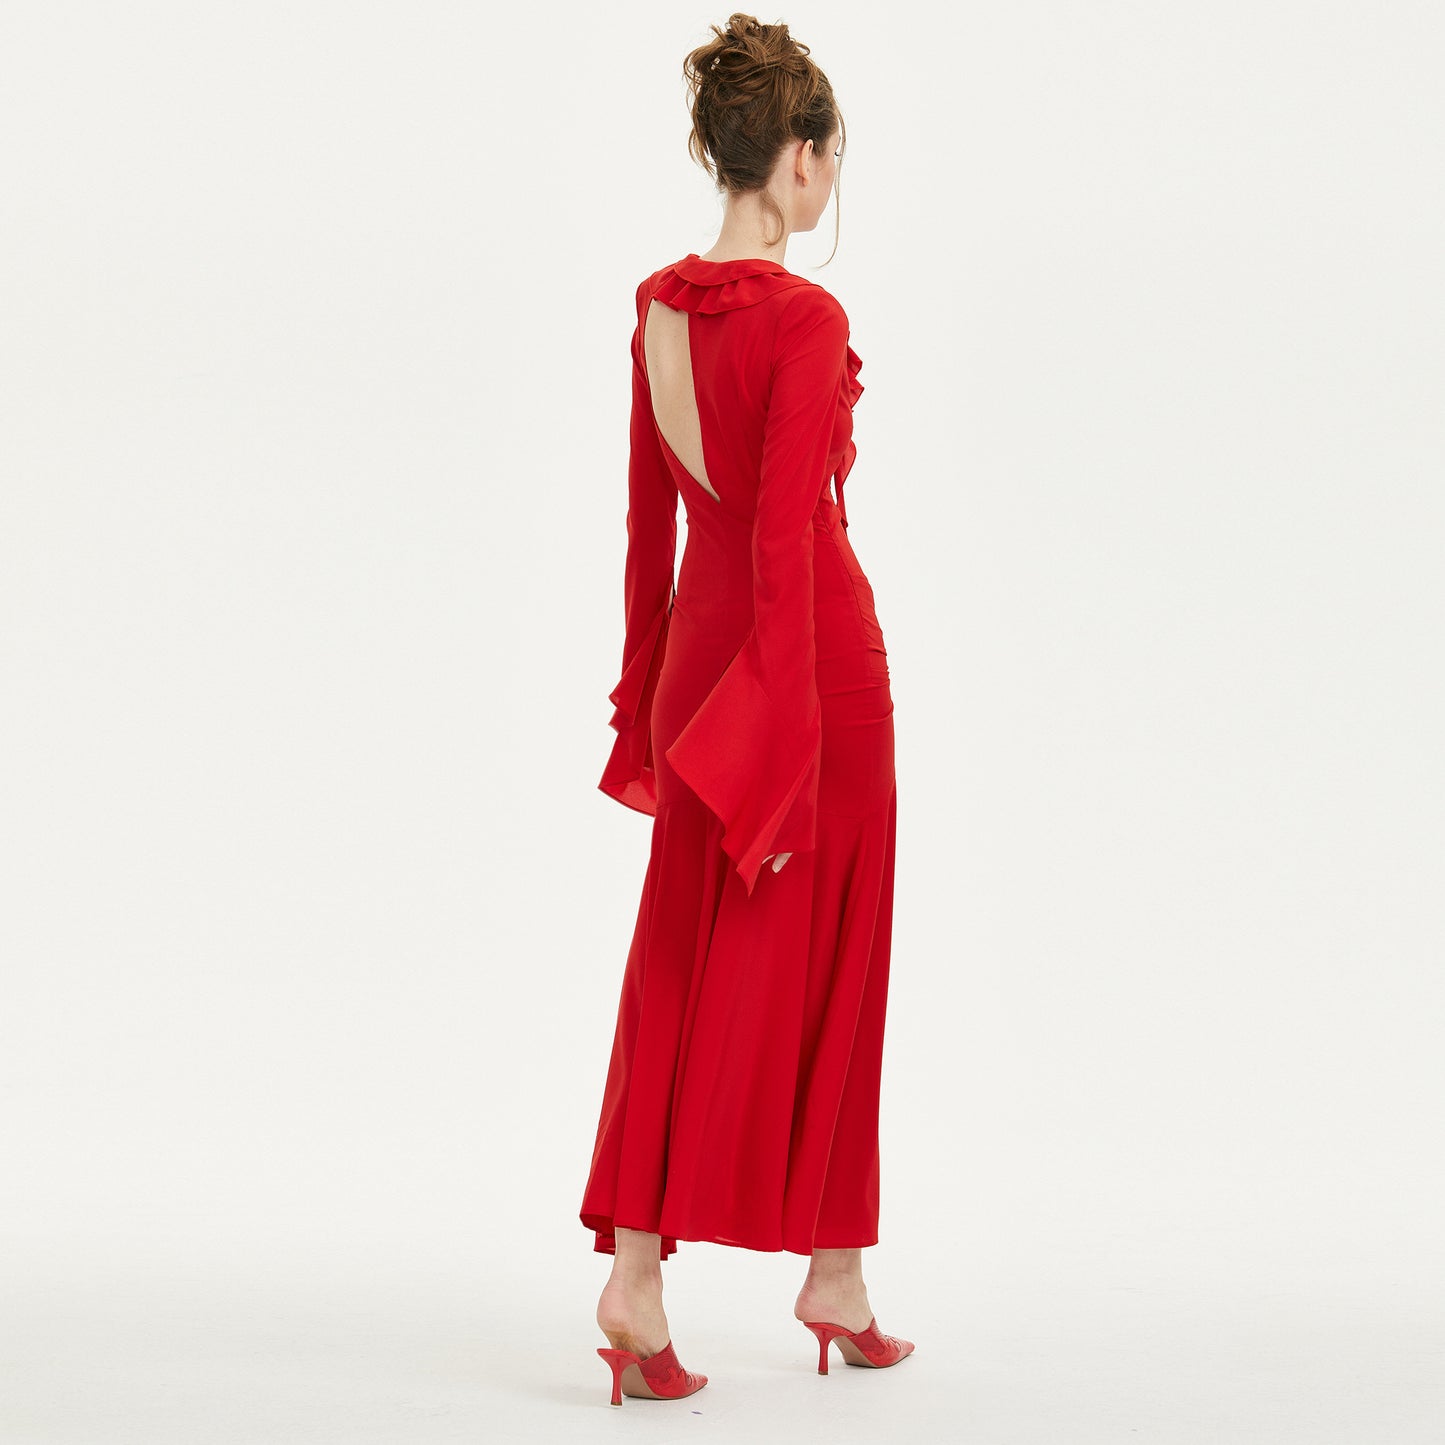 Tipsy Long Sleeve Backless Dress in Red